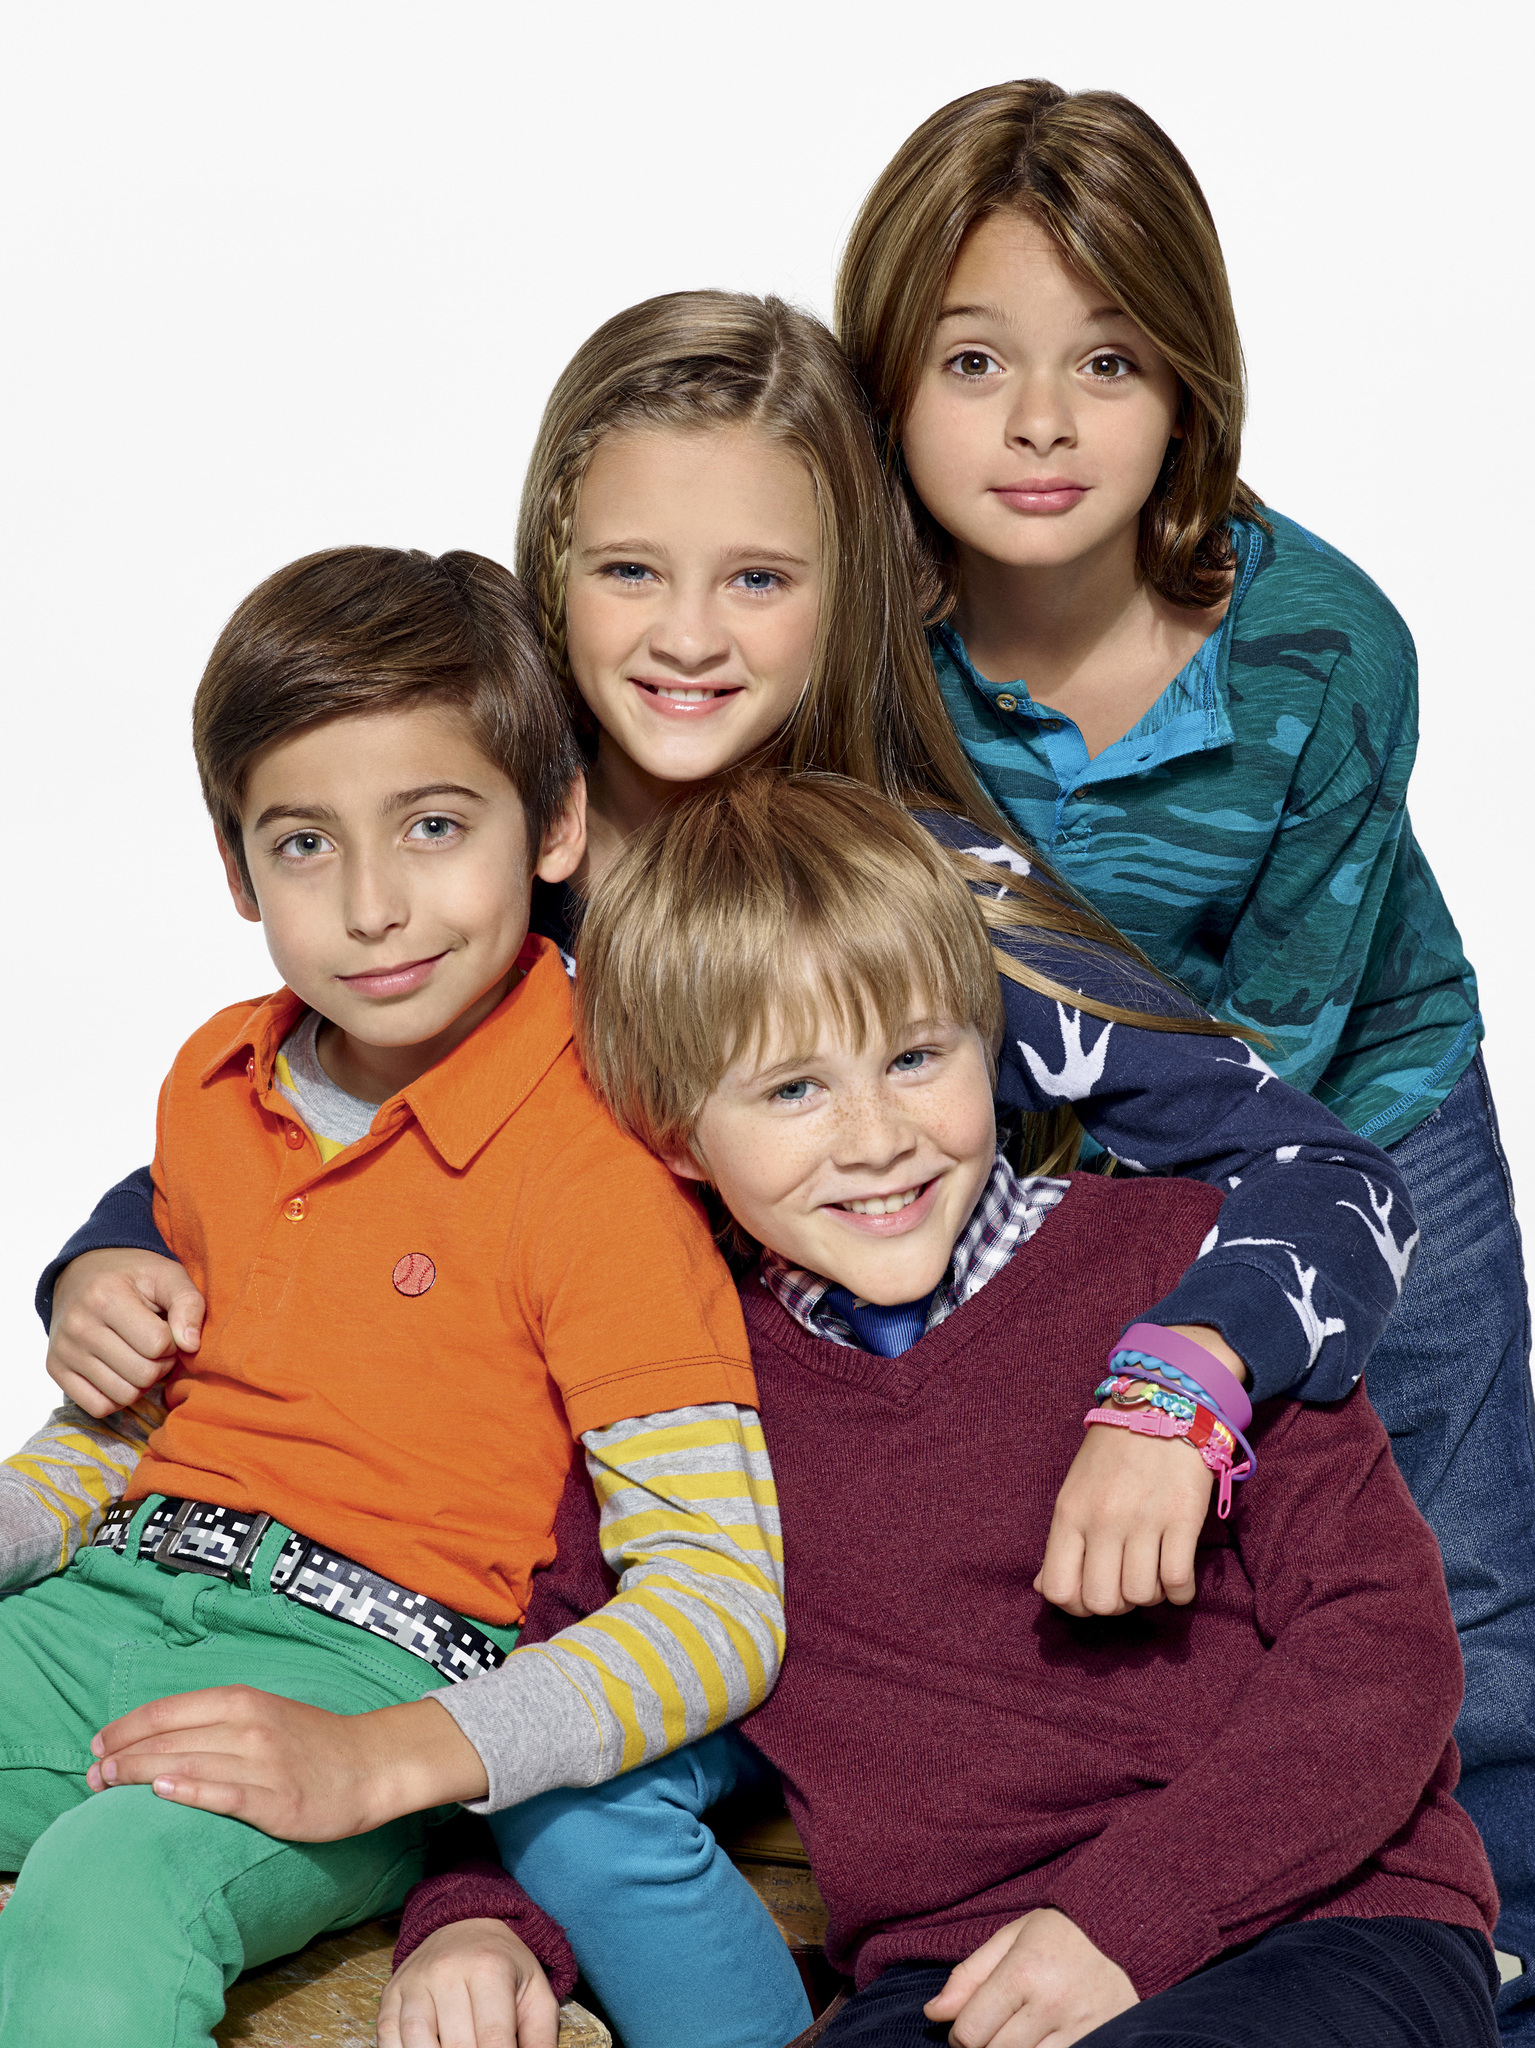 Casey Simpson, Mace Coronel, Aidan Gallagher and Lizzy Greene in Nicky, Ricky, Dicky & Dawn (2014)